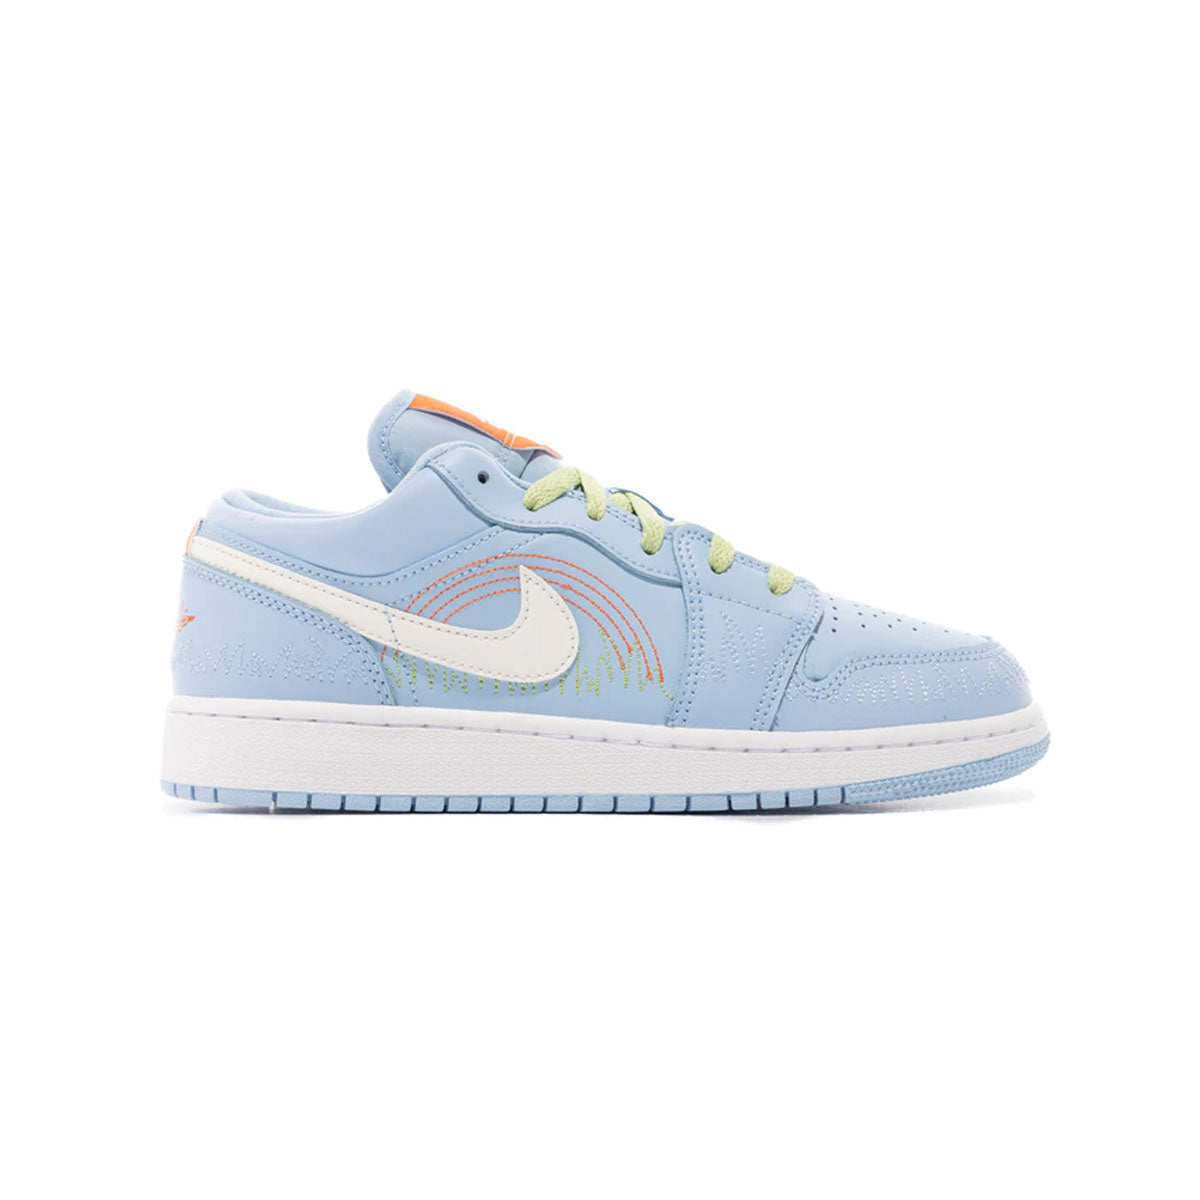 Where to Buy the Air Jordan 1 Low “Blue Stitch”